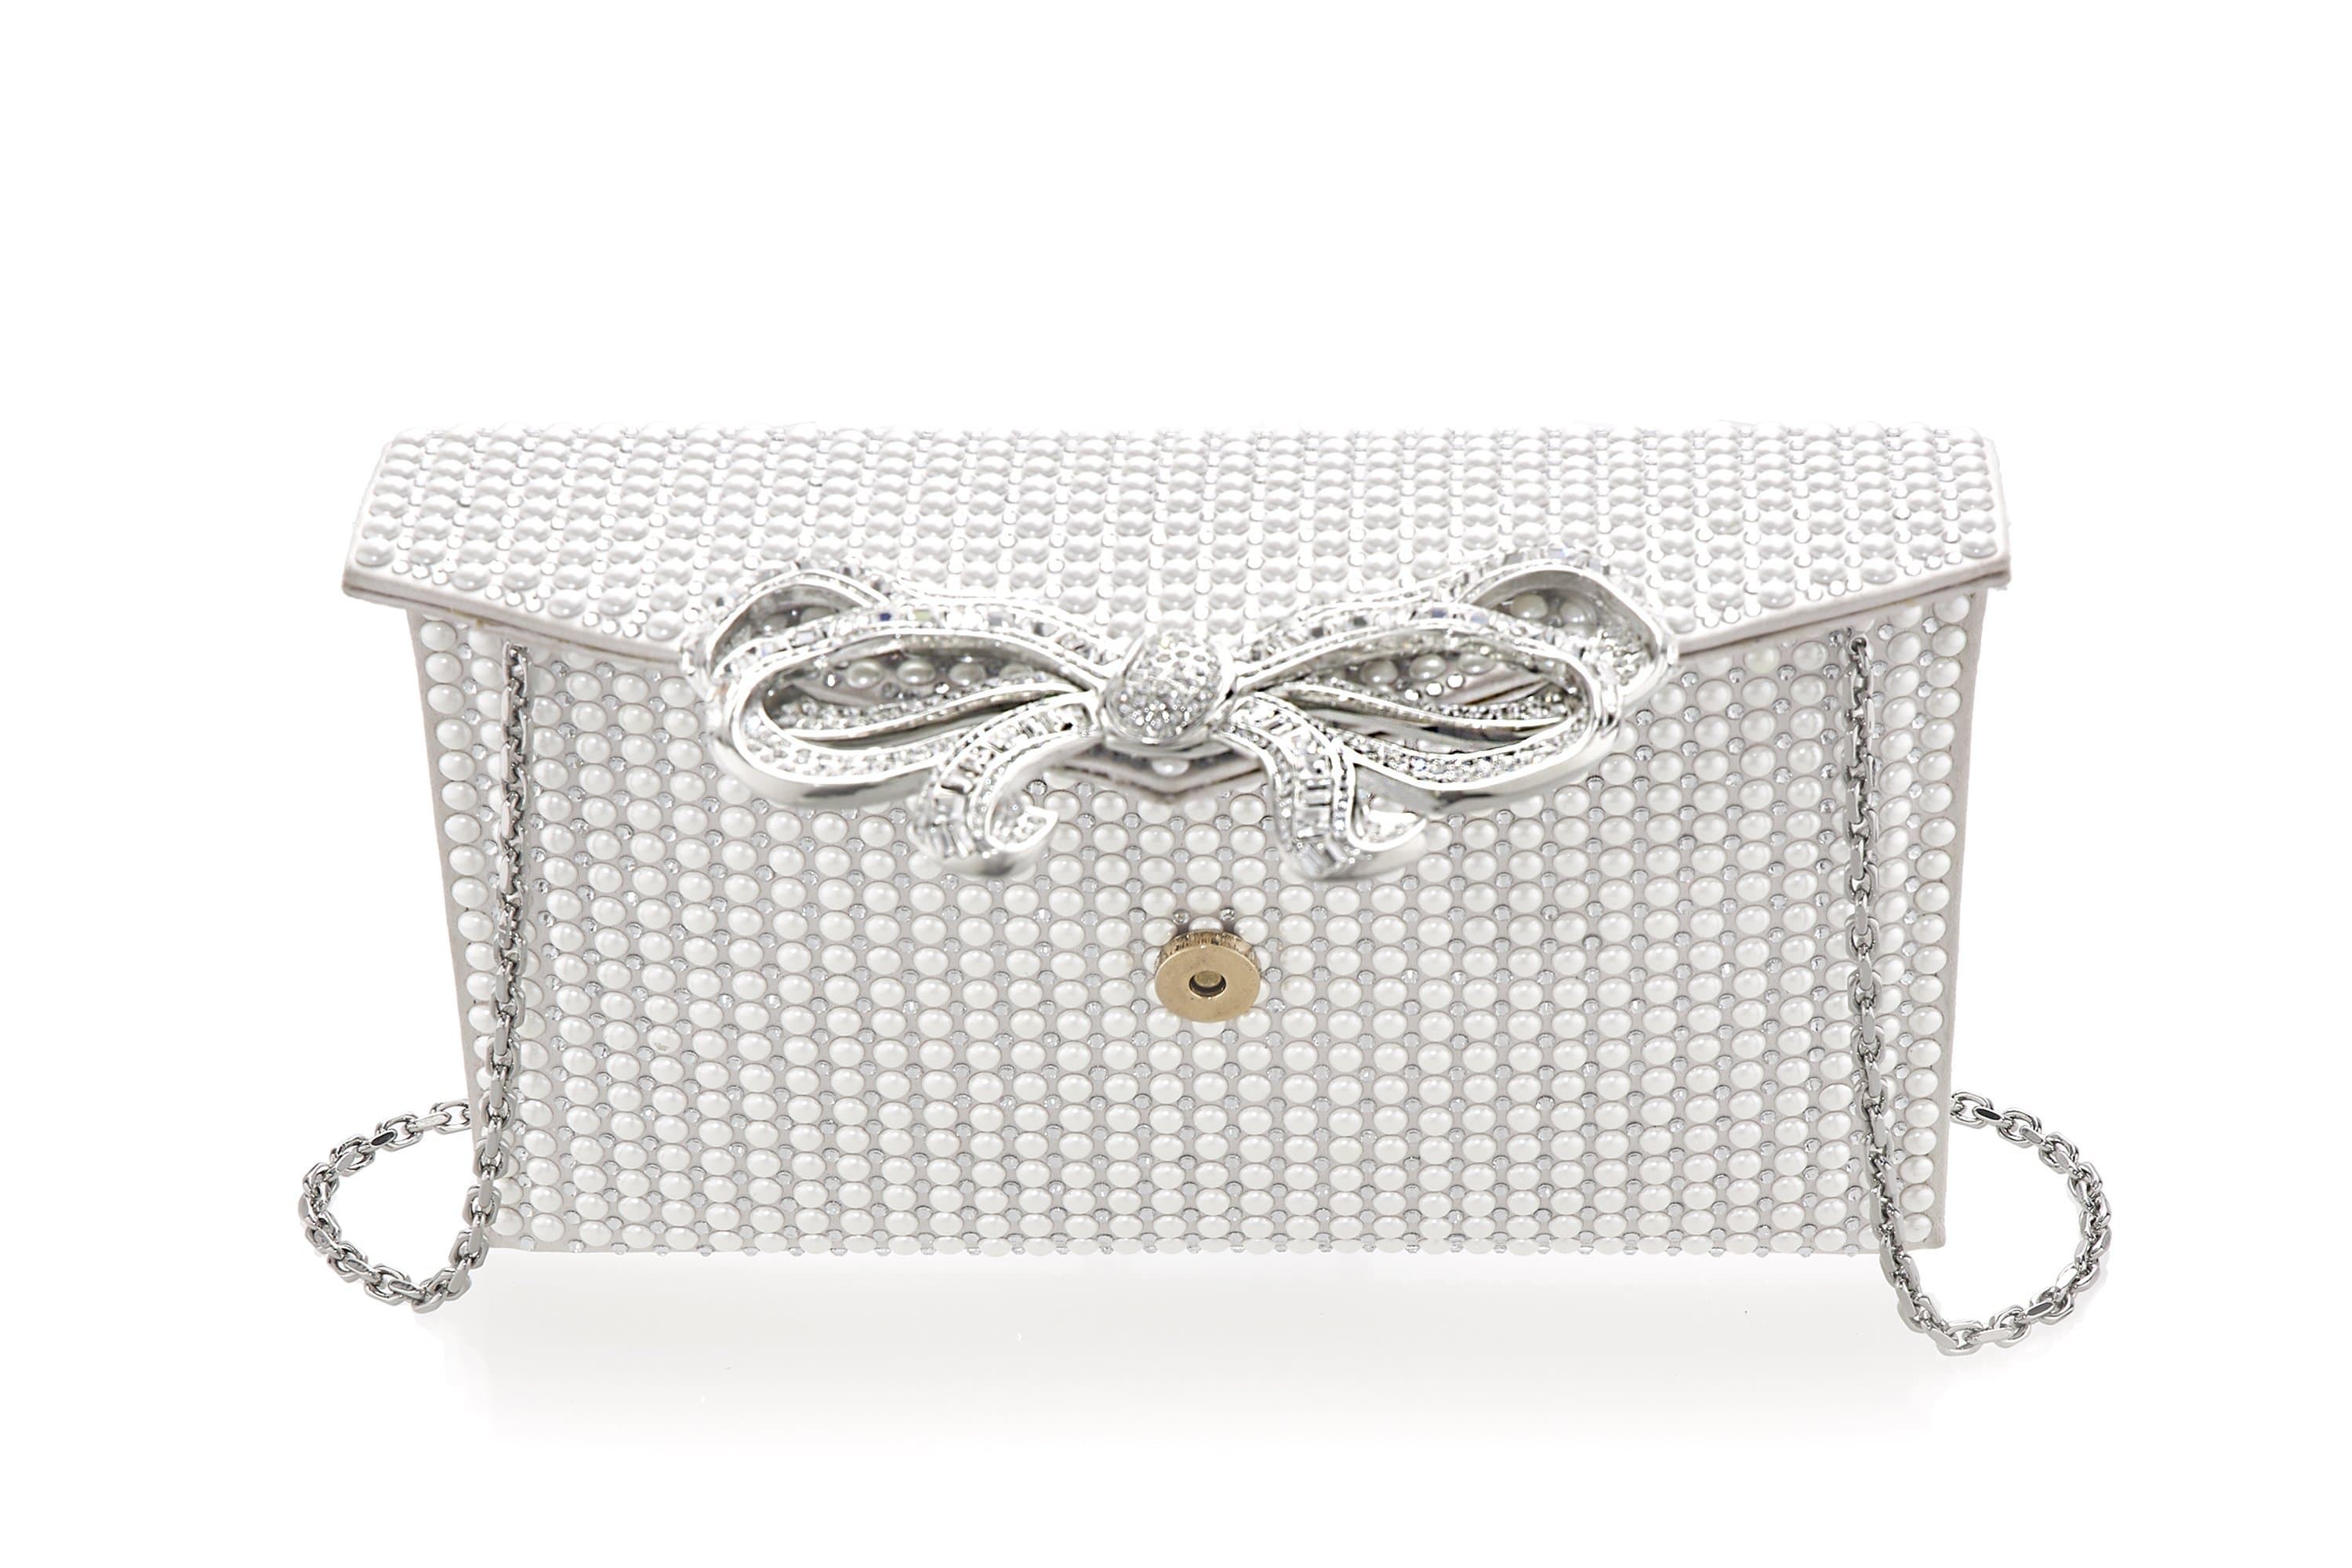 Judith Leiber Couture Women's Crystal Bow Envelope Clutch Bag